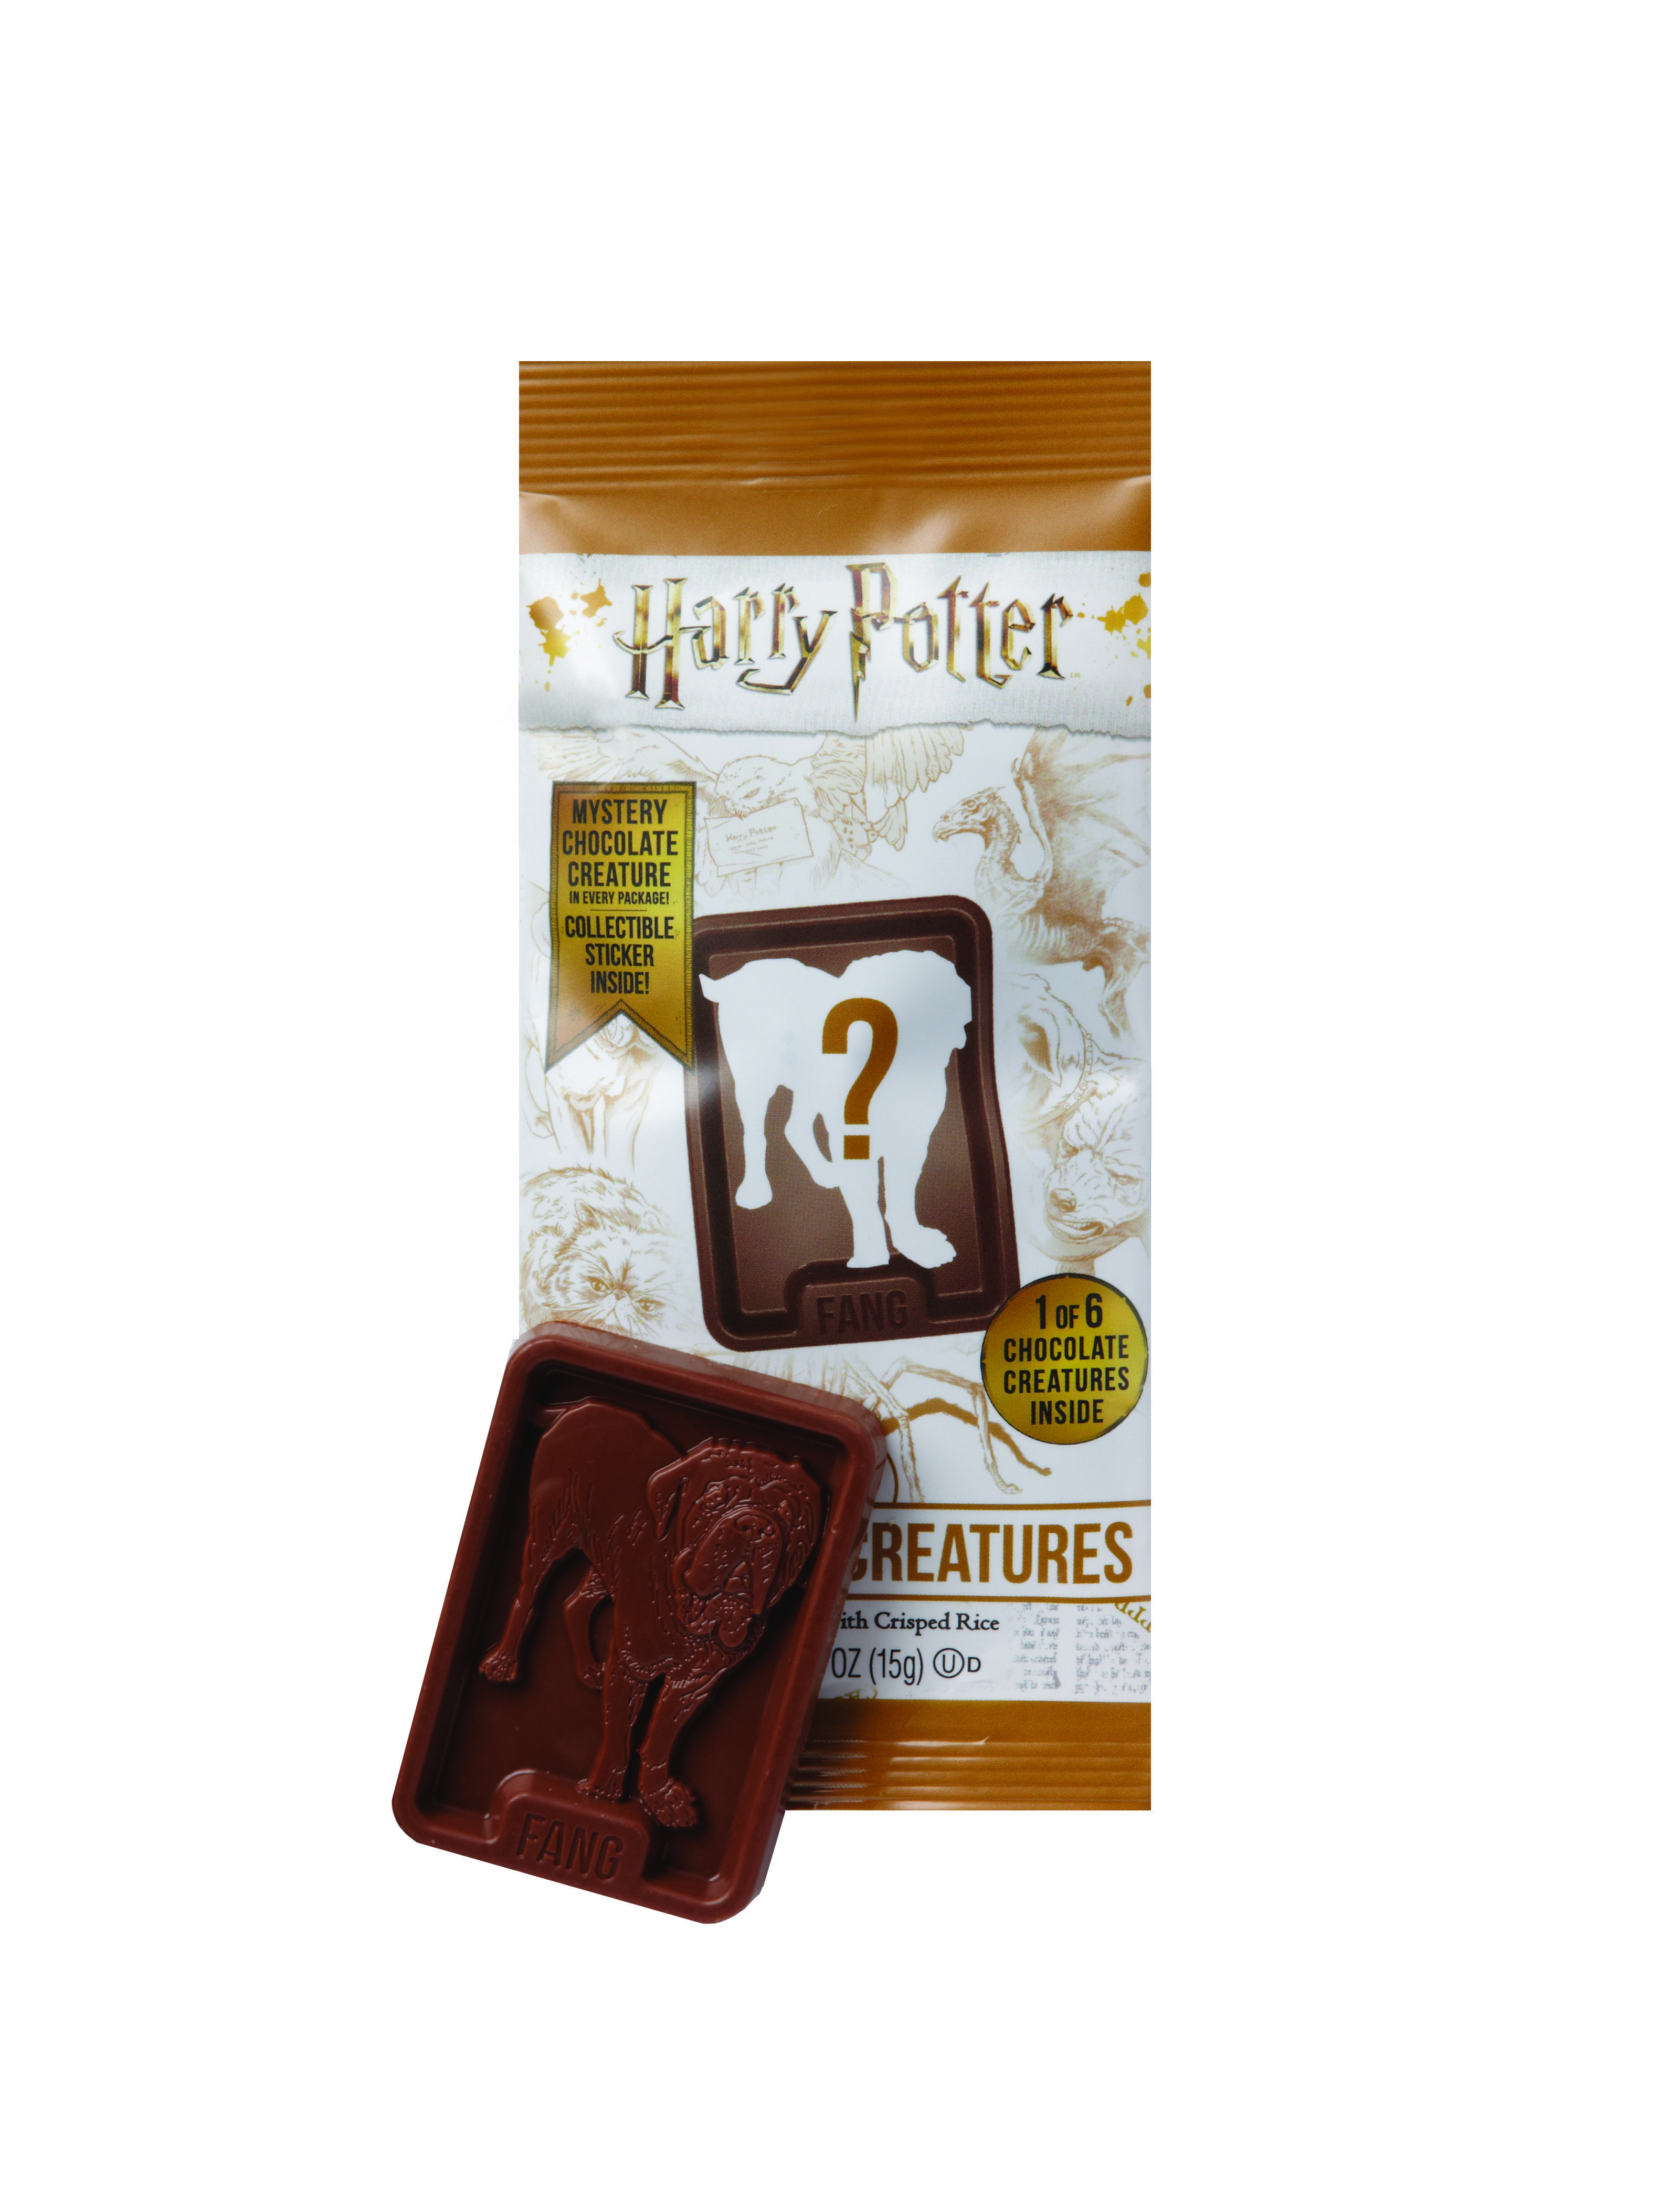 Jelly Belly Drops New Harry Potter-Themed Candy — Harry Potter Anniversary